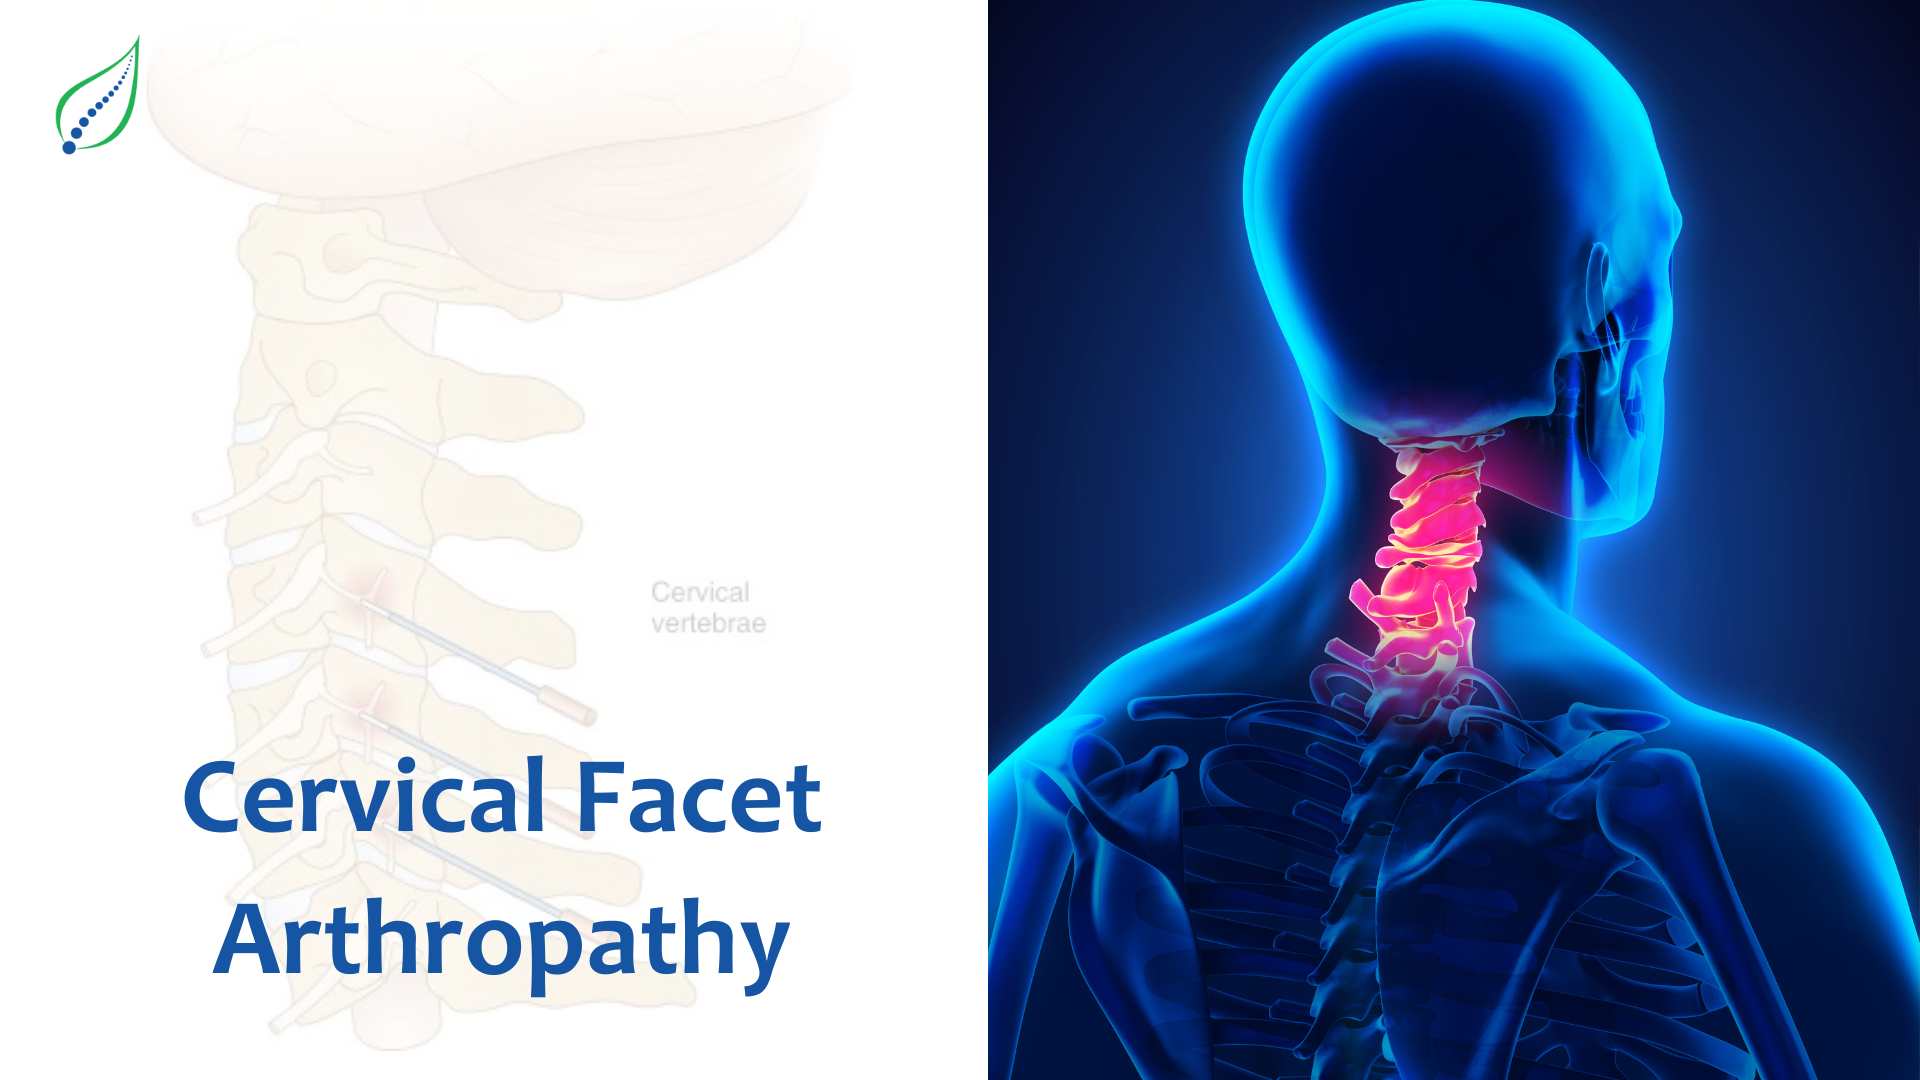 Cervical Facet Arthropathy - Causes, Symptoms, and Treatments